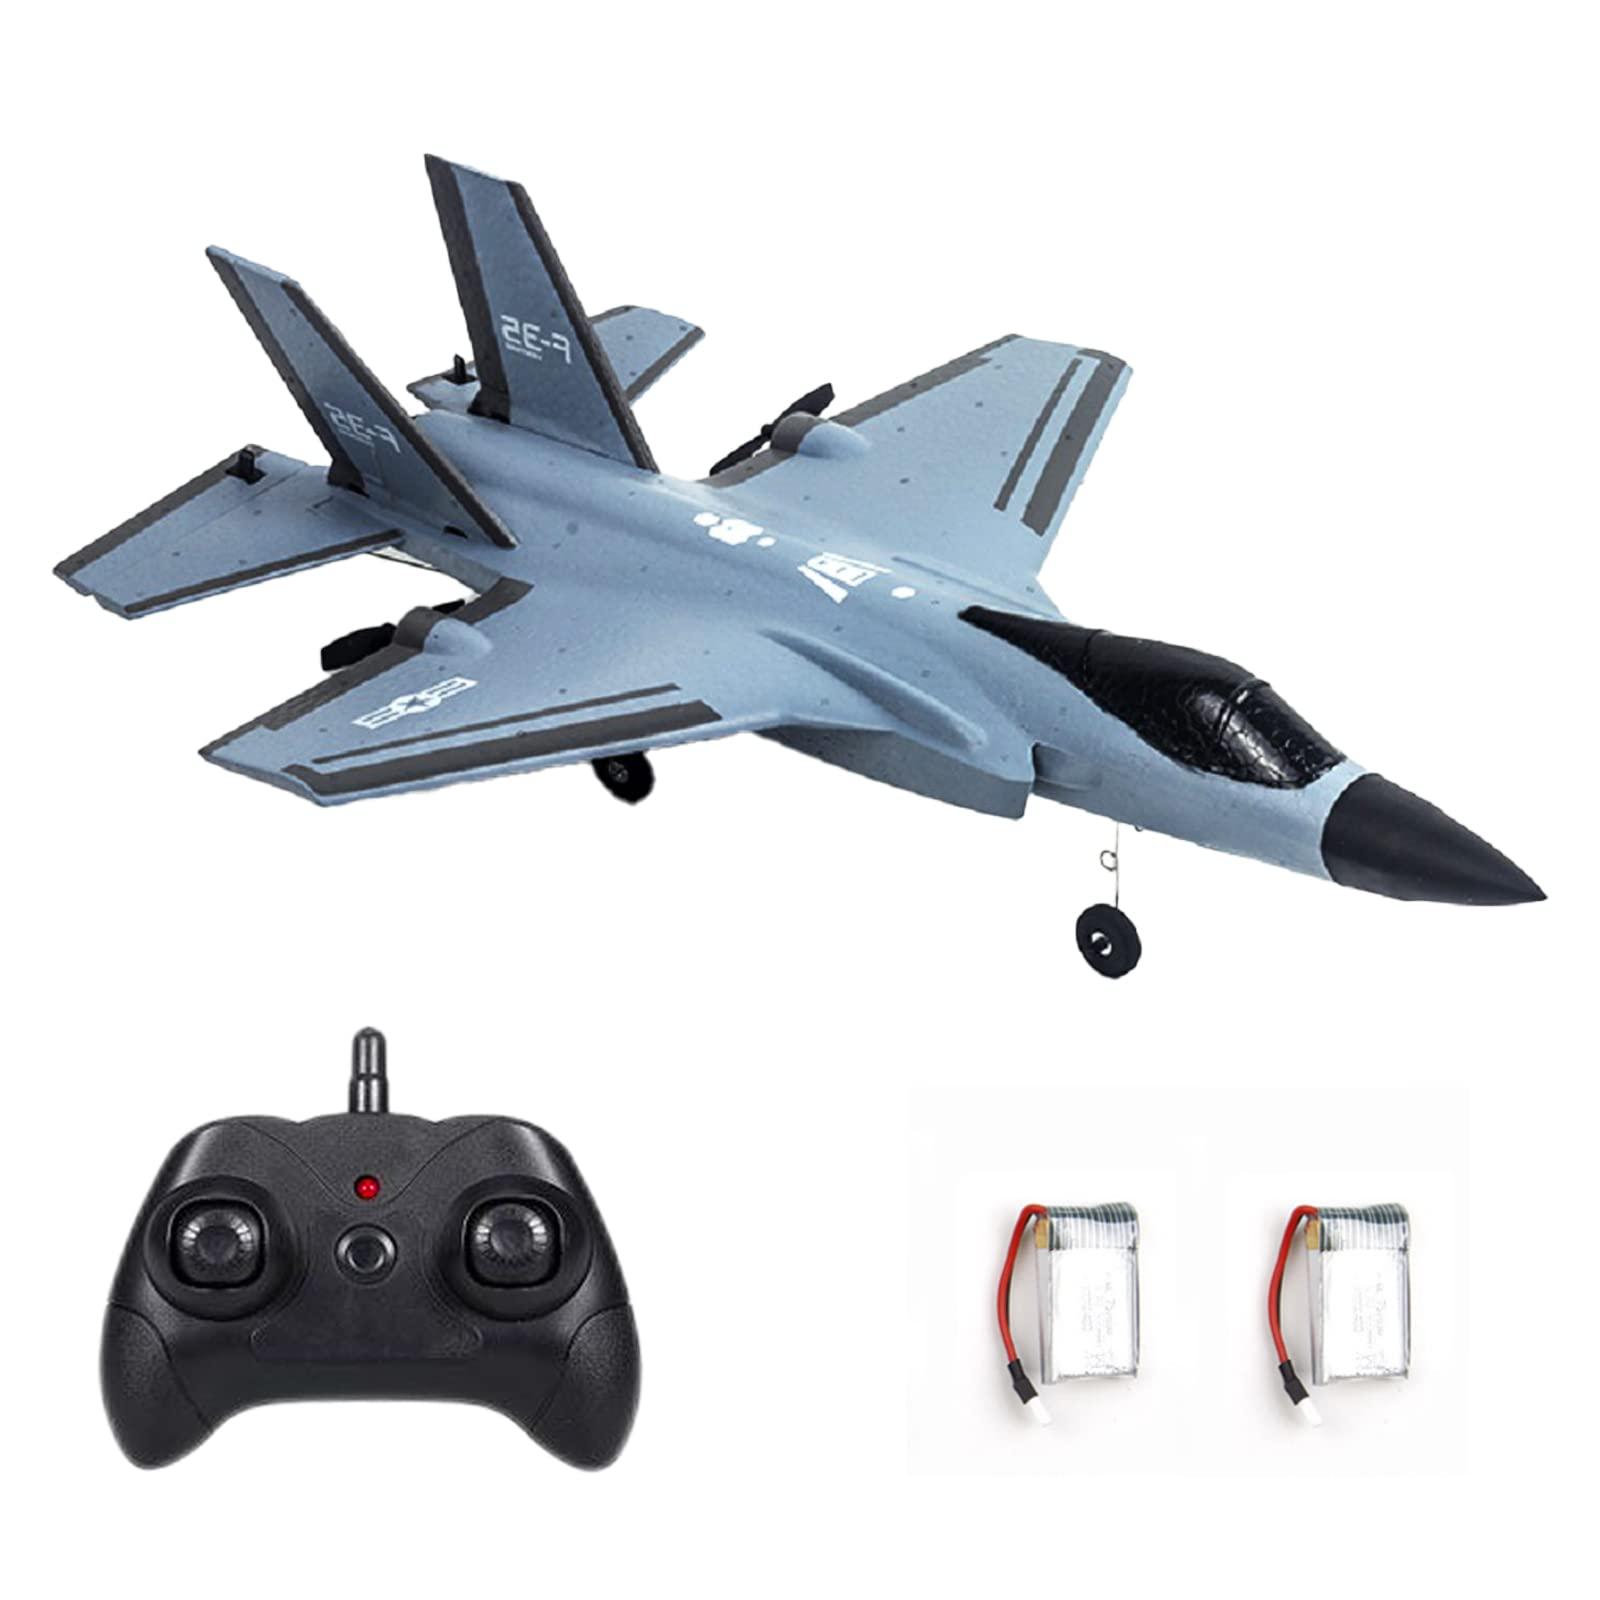  Experience the cutting-edge features of the F-35 remote control plane!